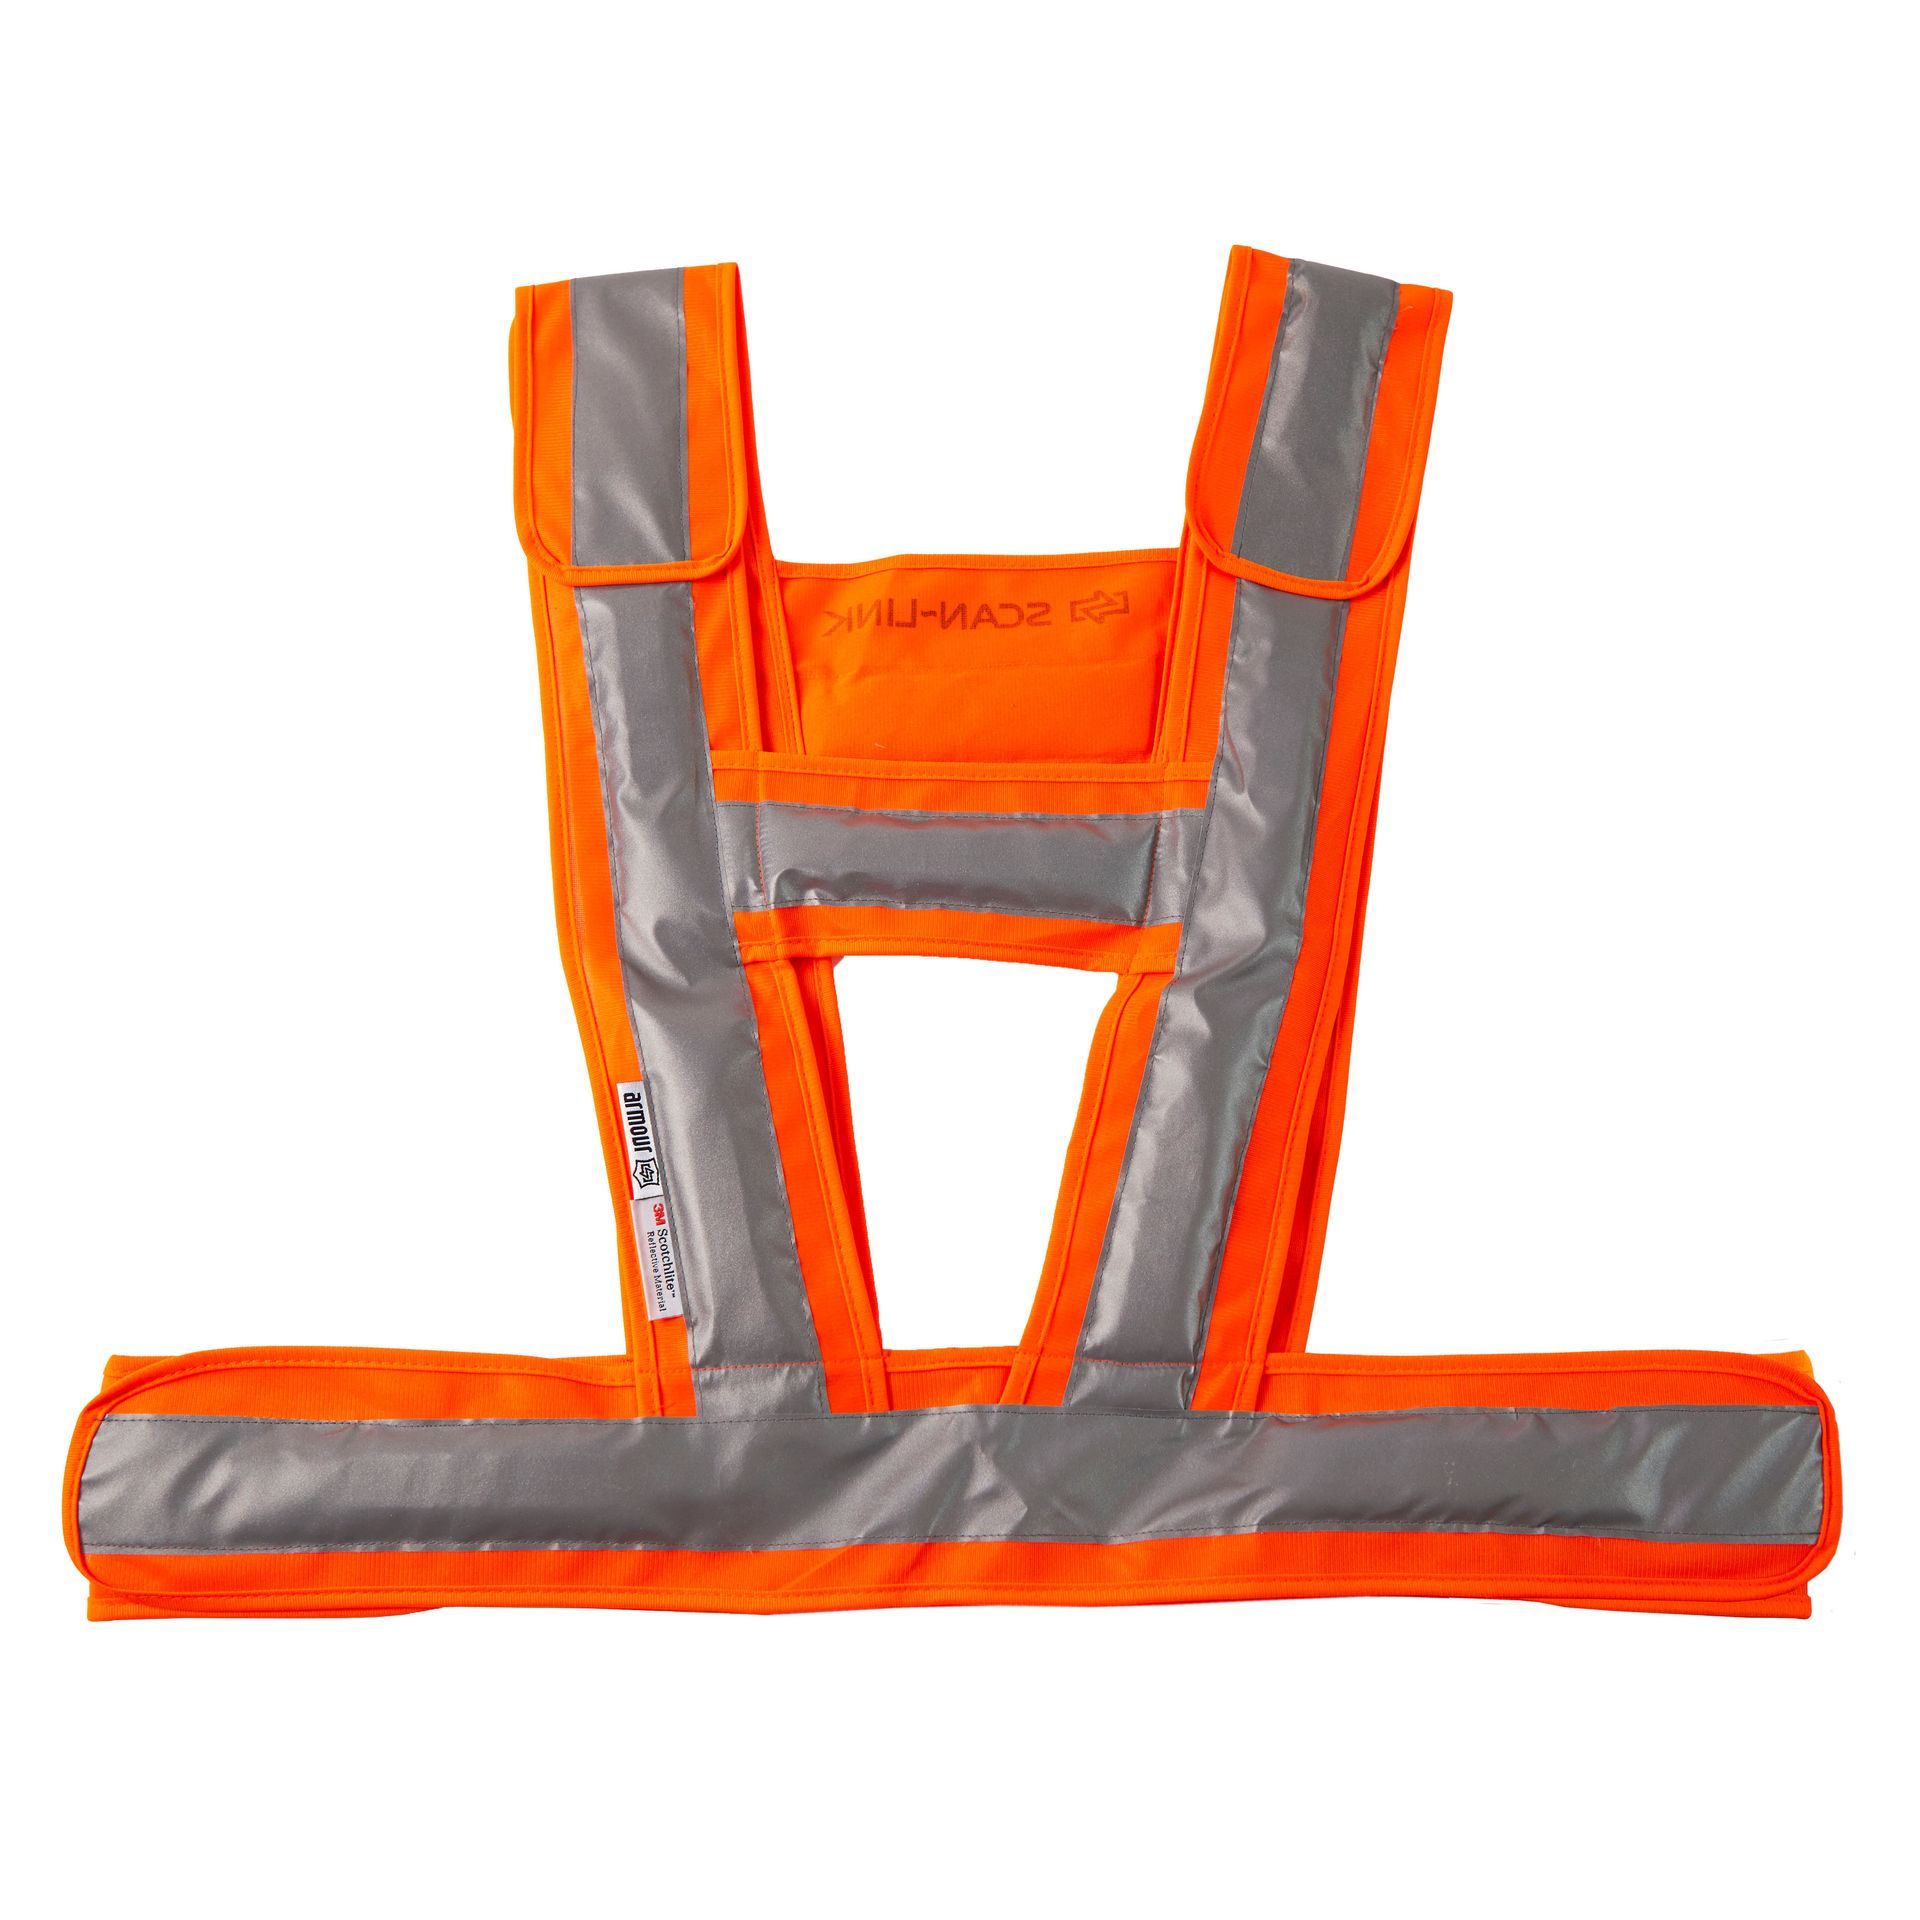 An orange and gray safety vest with the letter a on it